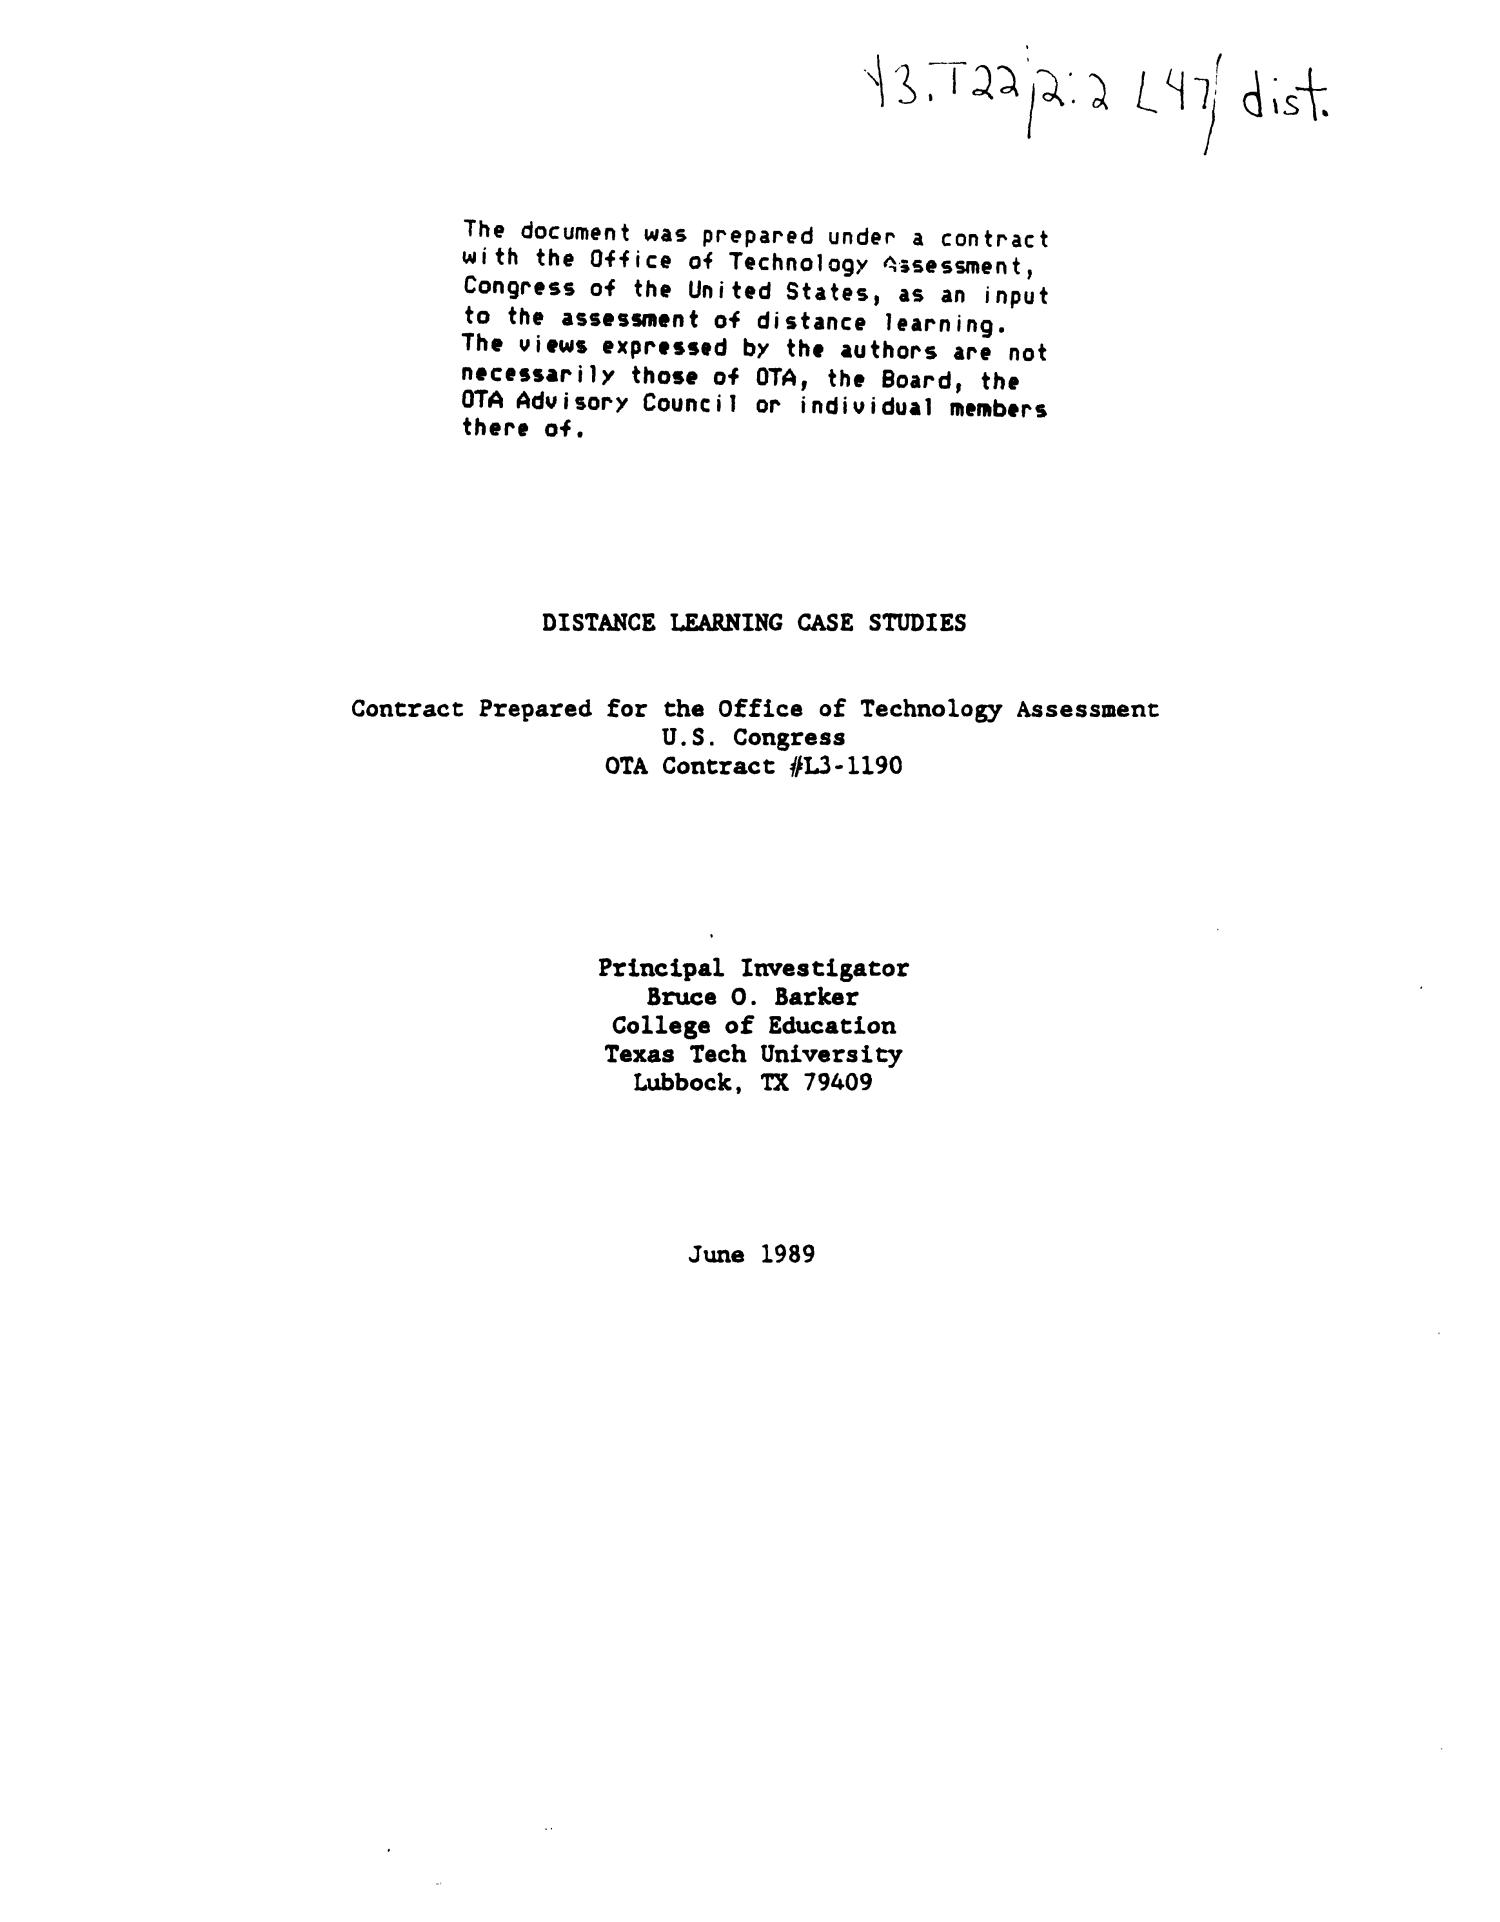 Distance learning case studies
                                                
                                                    Title Page
                                                